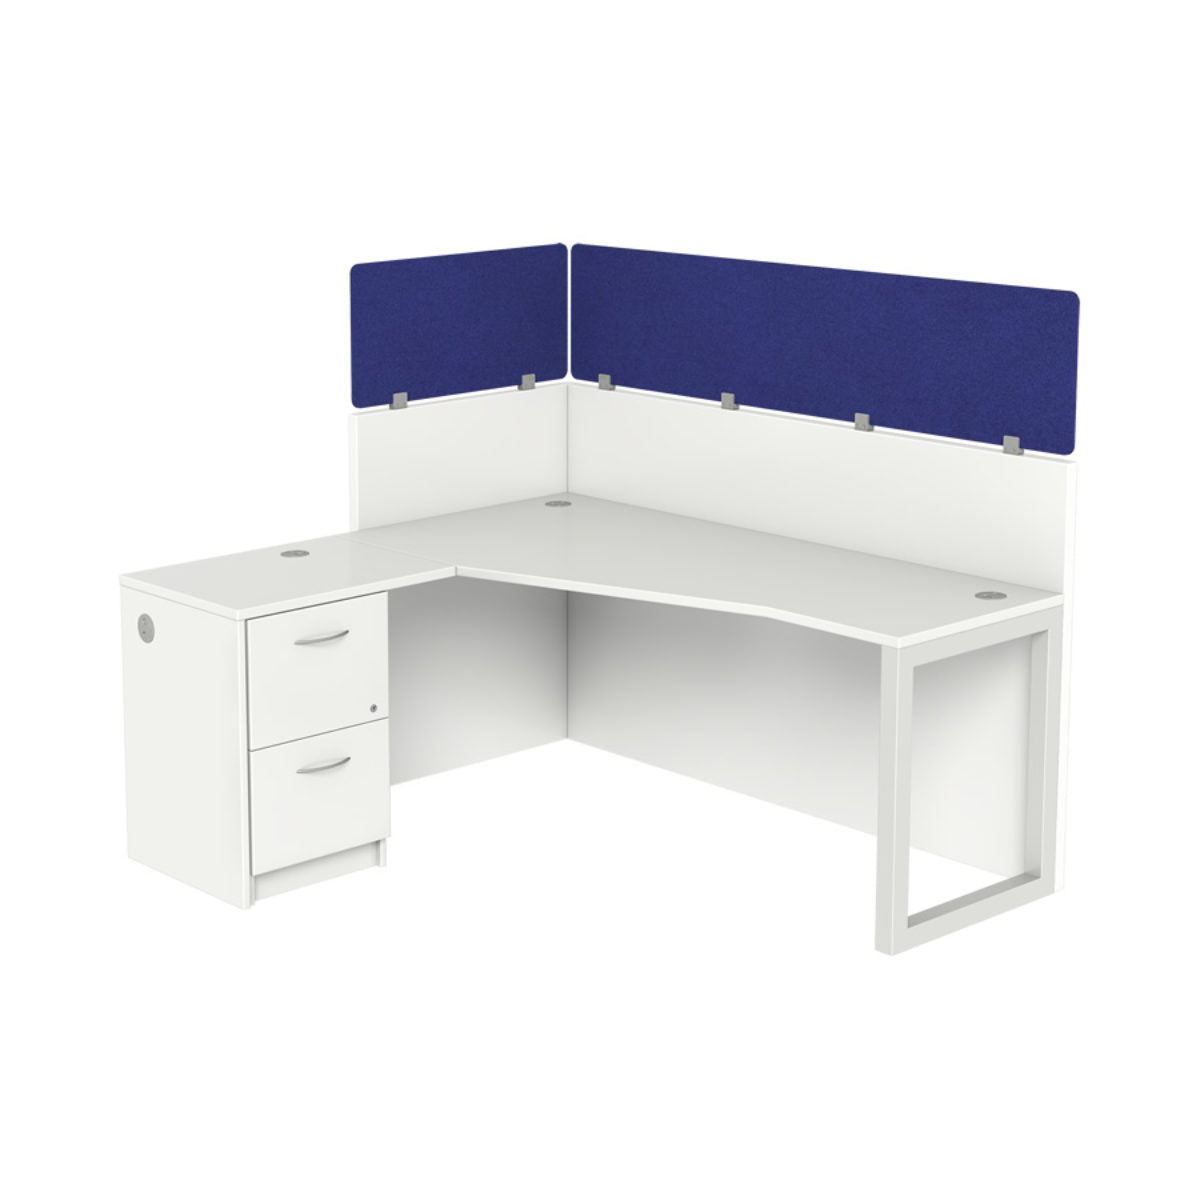 Stackers™ Cubicle Extender Panels